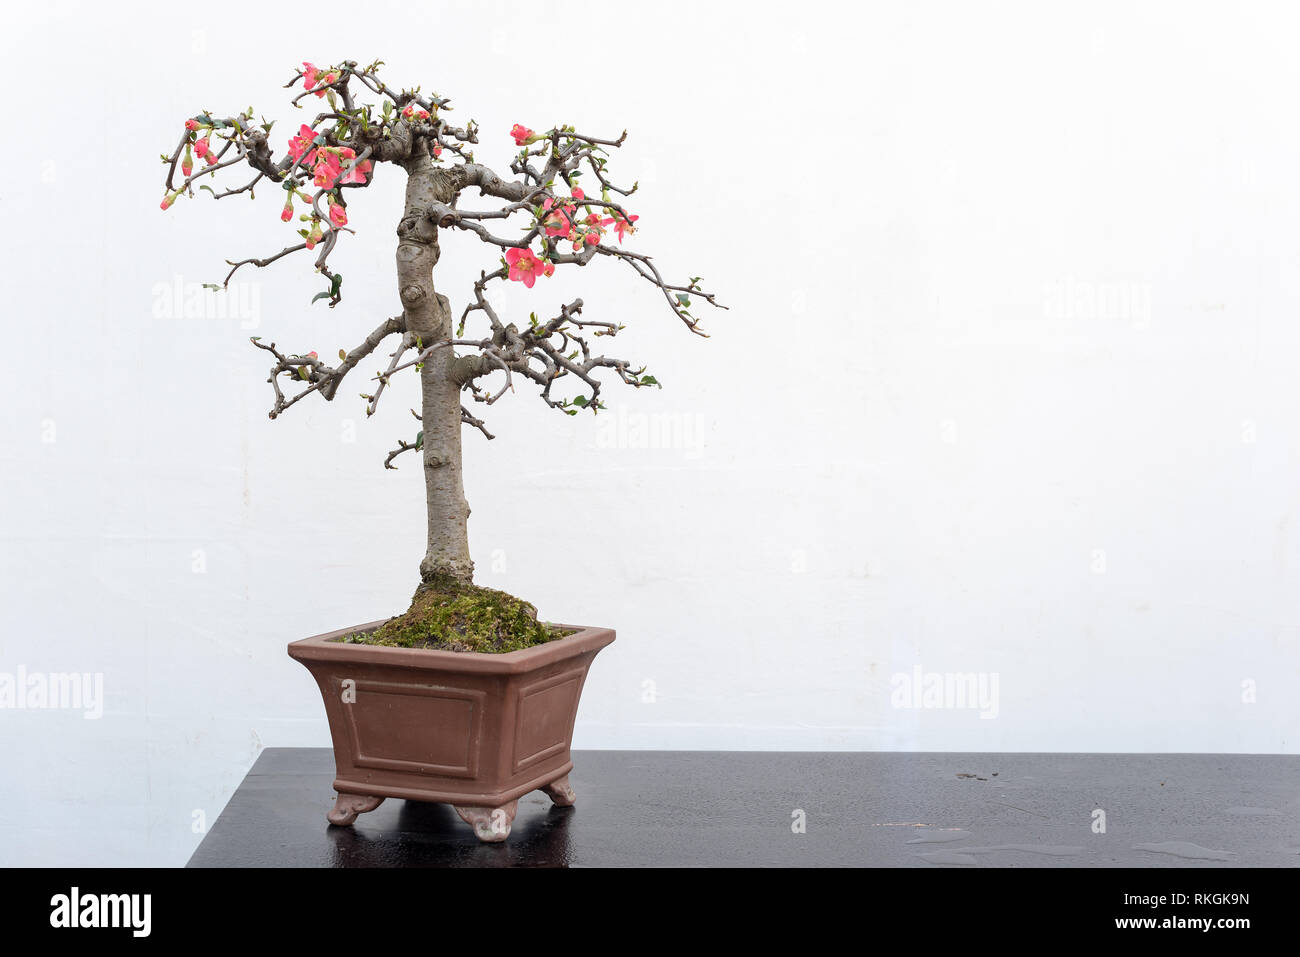 Chaenomeles bonsai tree on a wooden table againt white wall in Baihuatan public park, Chengdu, Sichuan province, China Stock Photo